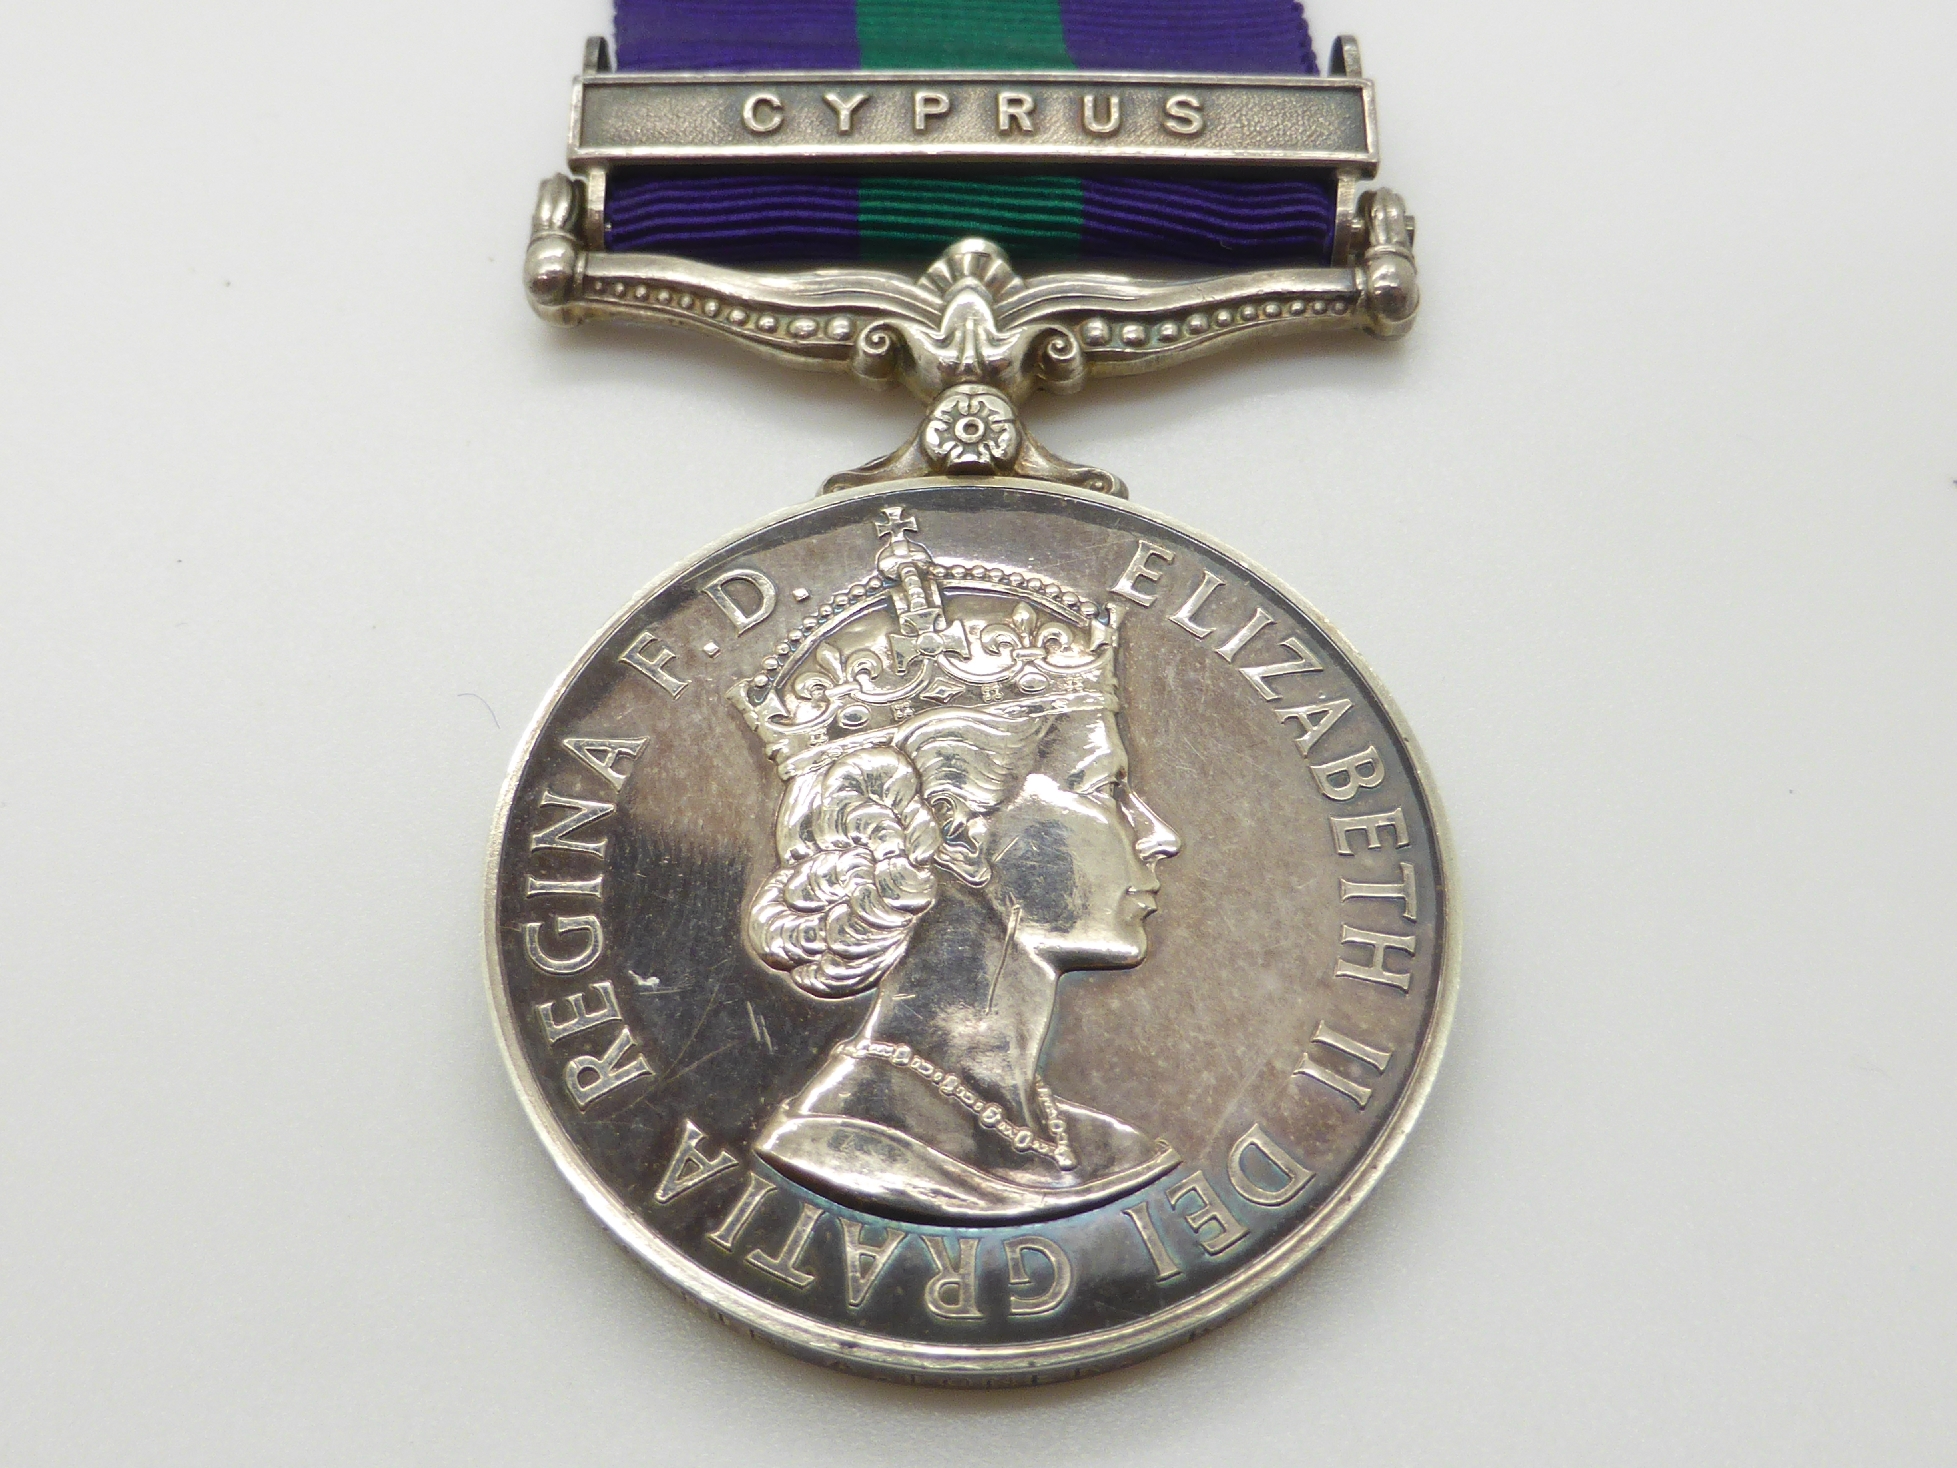 Elizabeth II British Army General Service Medal with Cyprus clasp named to 23334876 Pte A Toner K. - Image 3 of 3